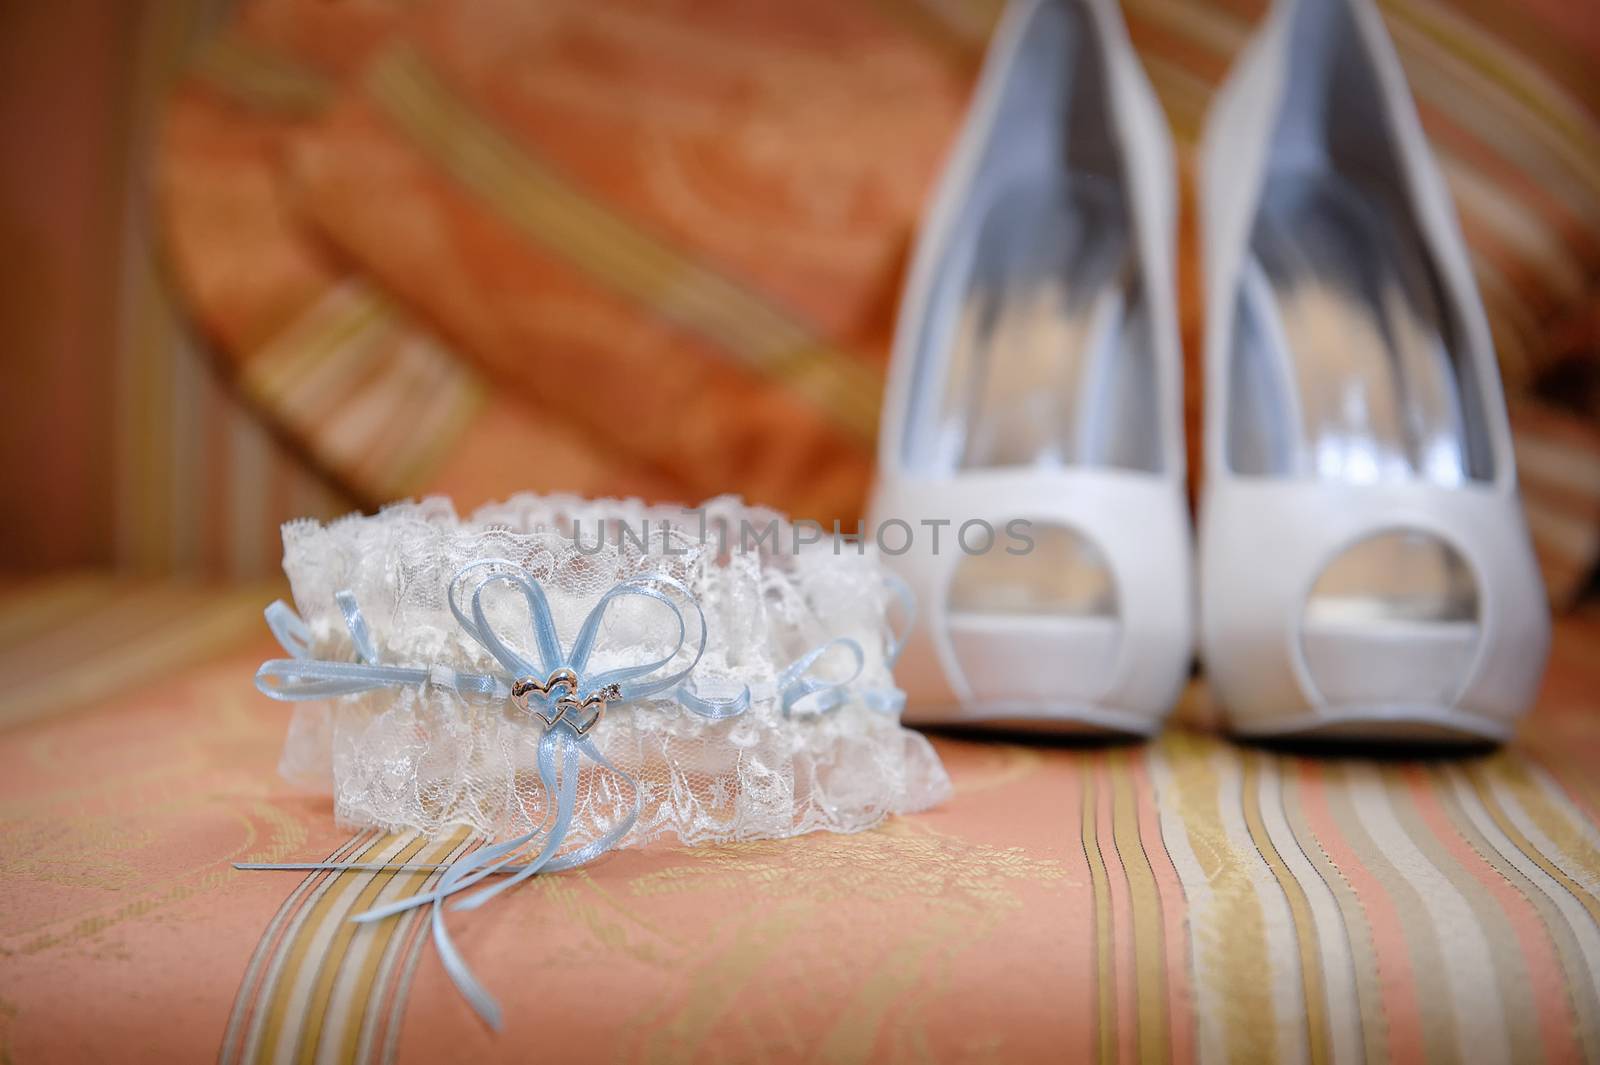 wedding accessories and bridal shoes on the table